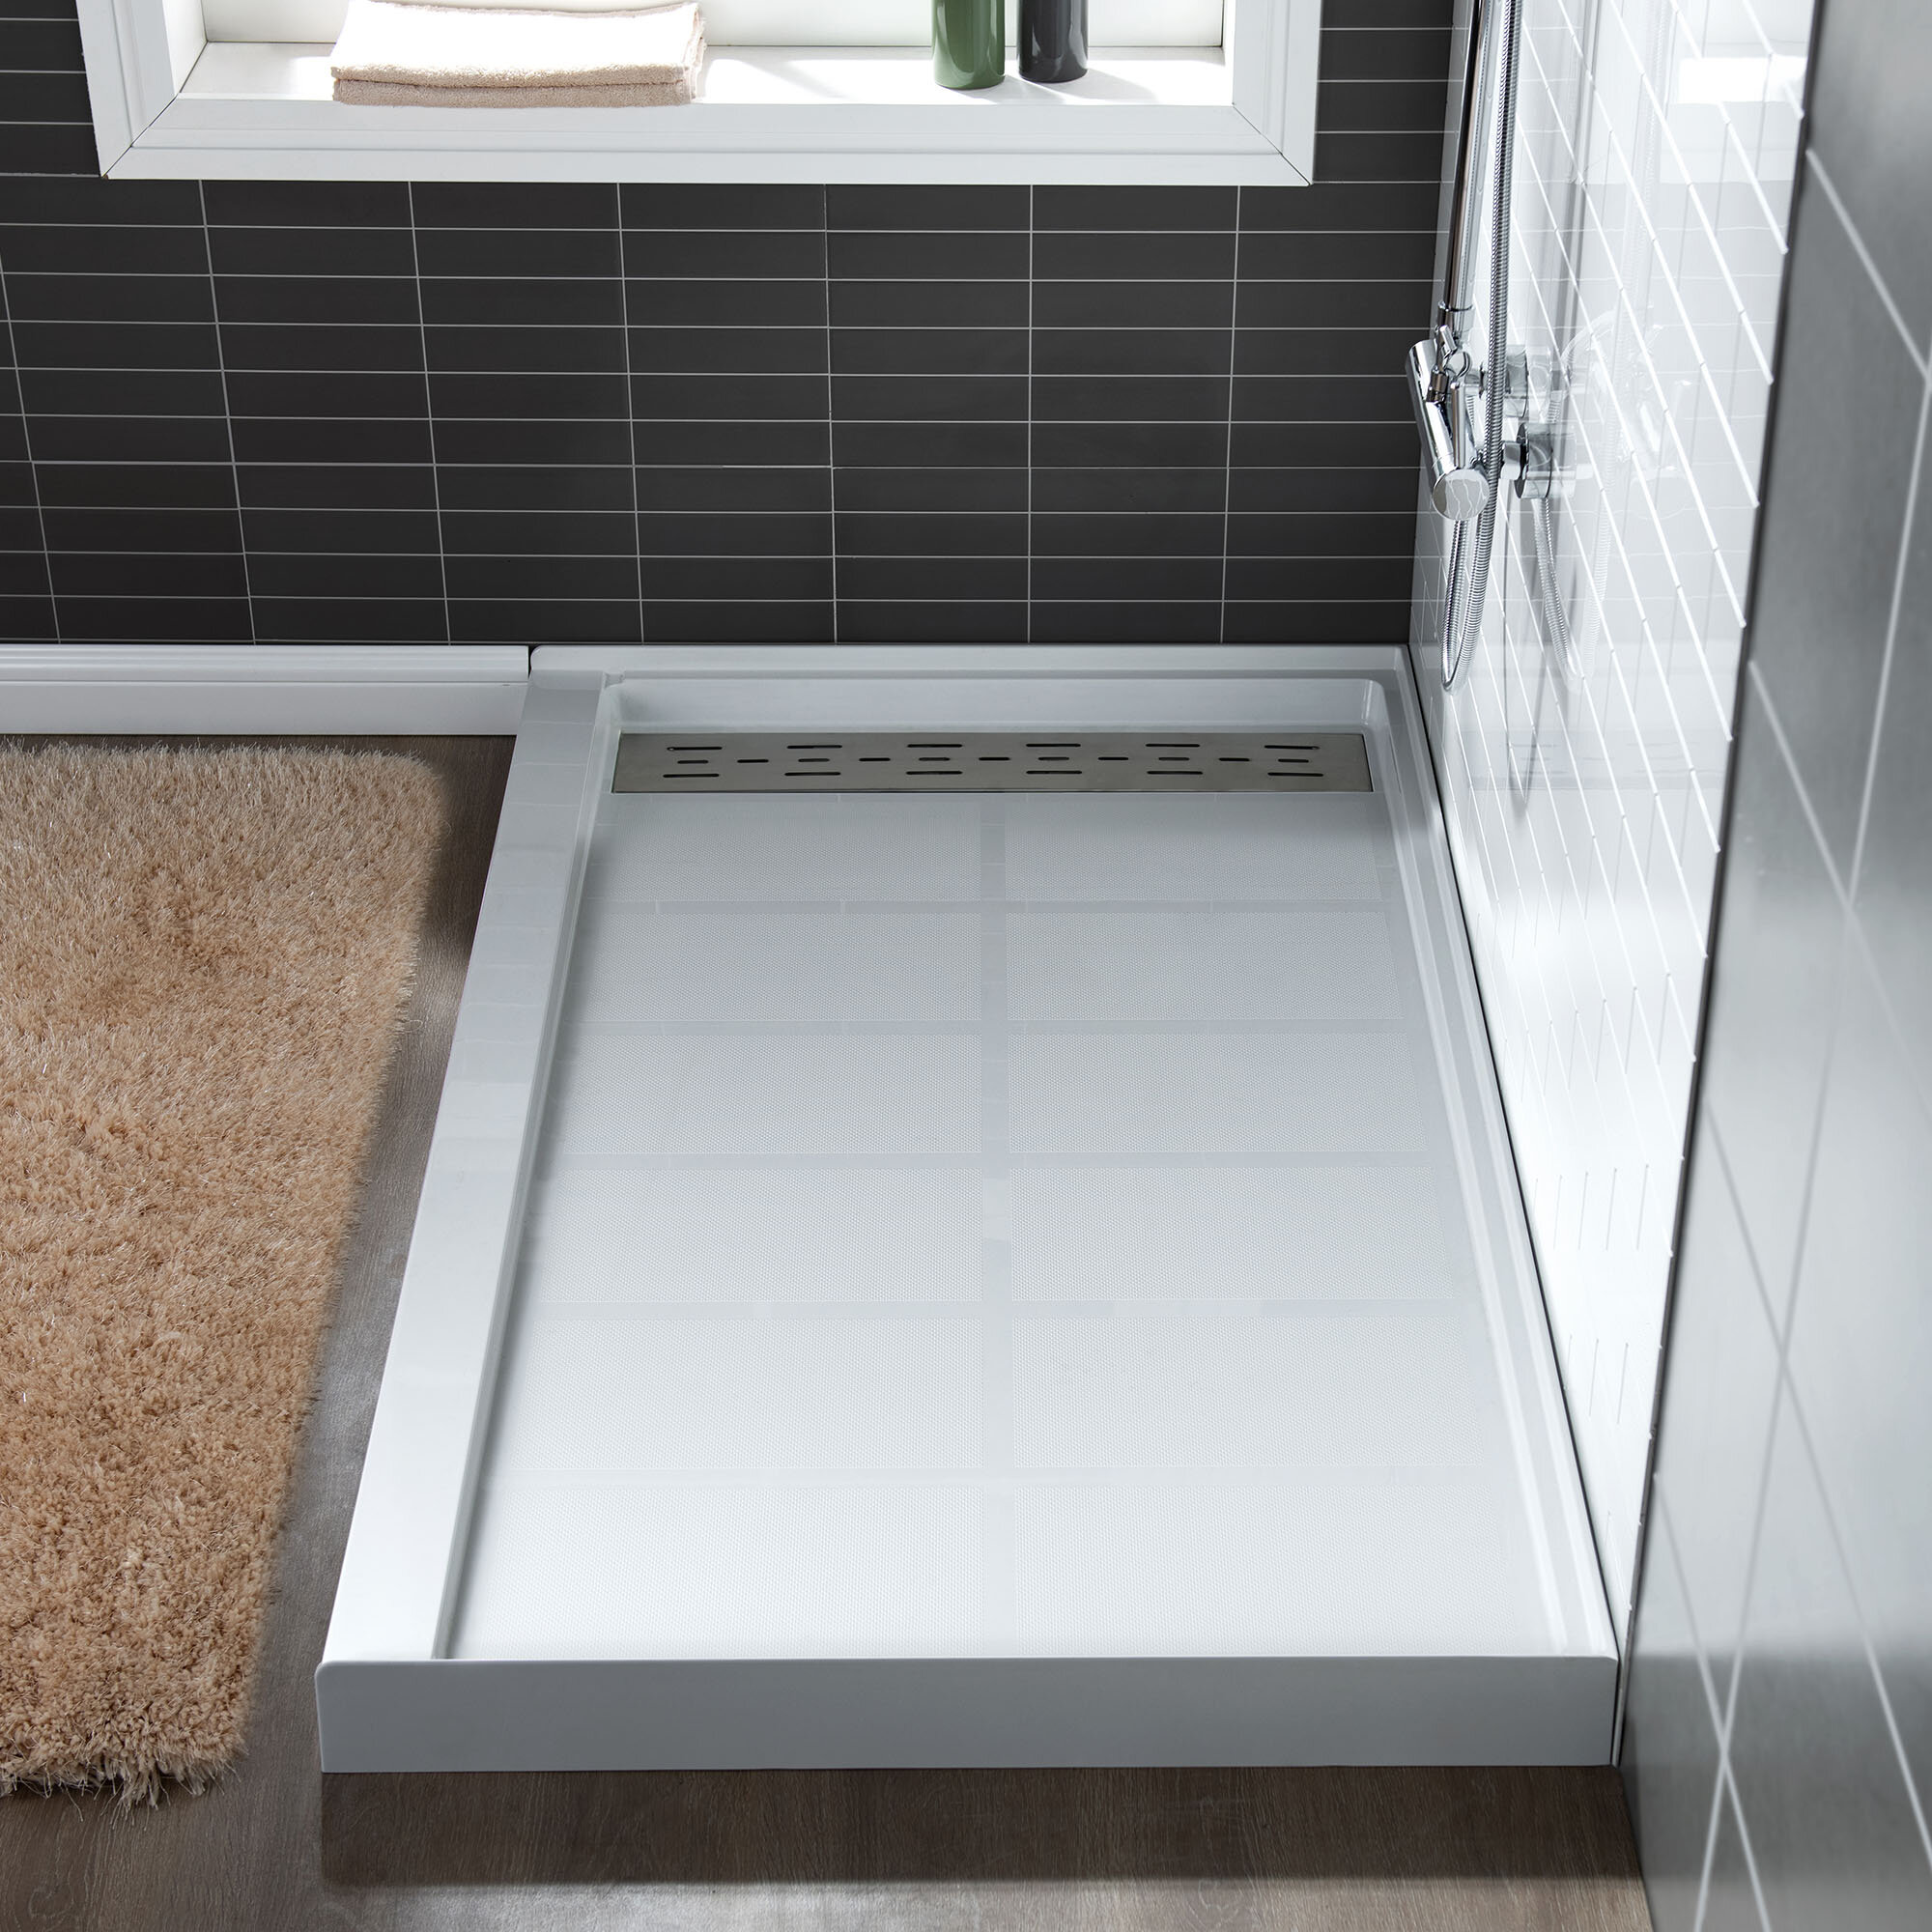 Tileable Shower Base 60x34 with Integrated Center PVC Drain Ready for Tile 34-Inch Depth by 60-Inch Width SBR6034 Tileable 